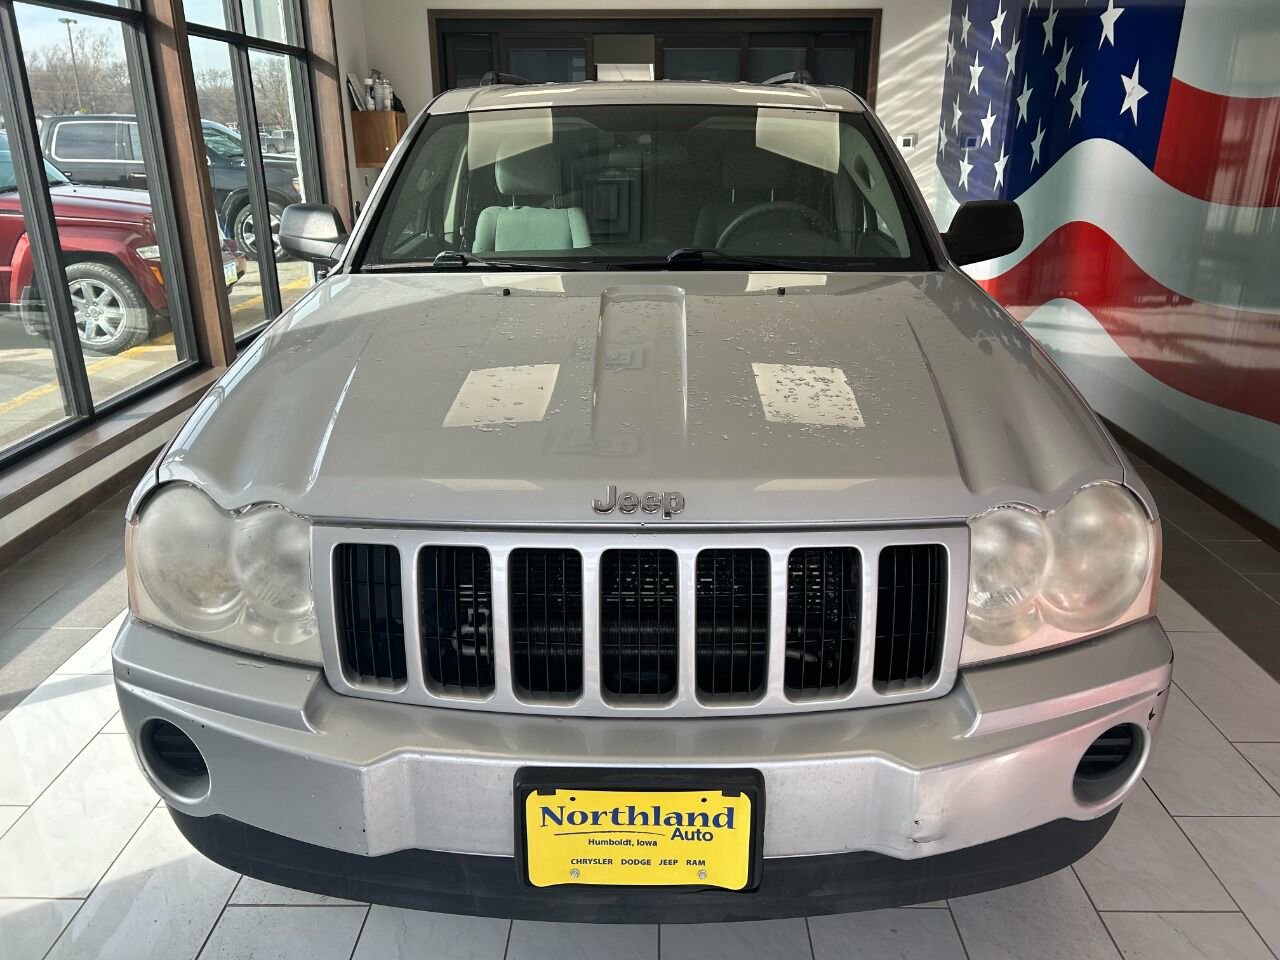 Used 2007 Jeep Grand Cherokee Laredo with VIN 1J8GR48K27C548682 for sale in Humboldt, IA